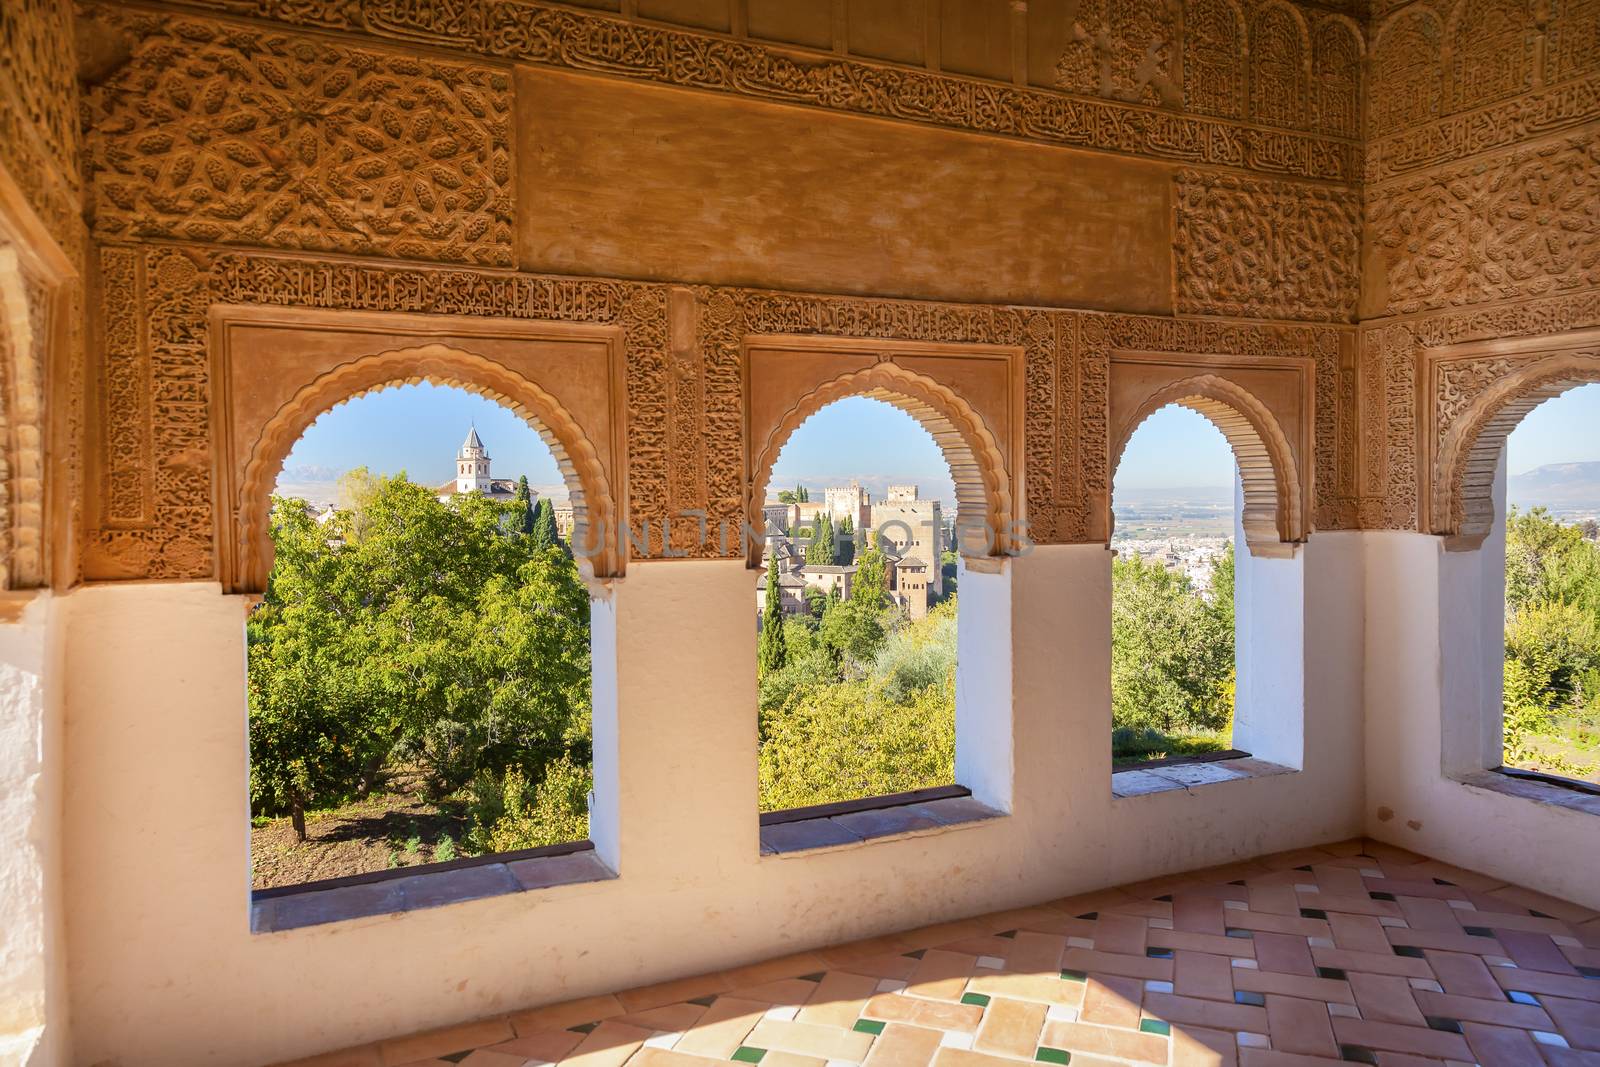 Alhambra Moorish Wall Designs City View Granada Andalusia Spain by bill_perry